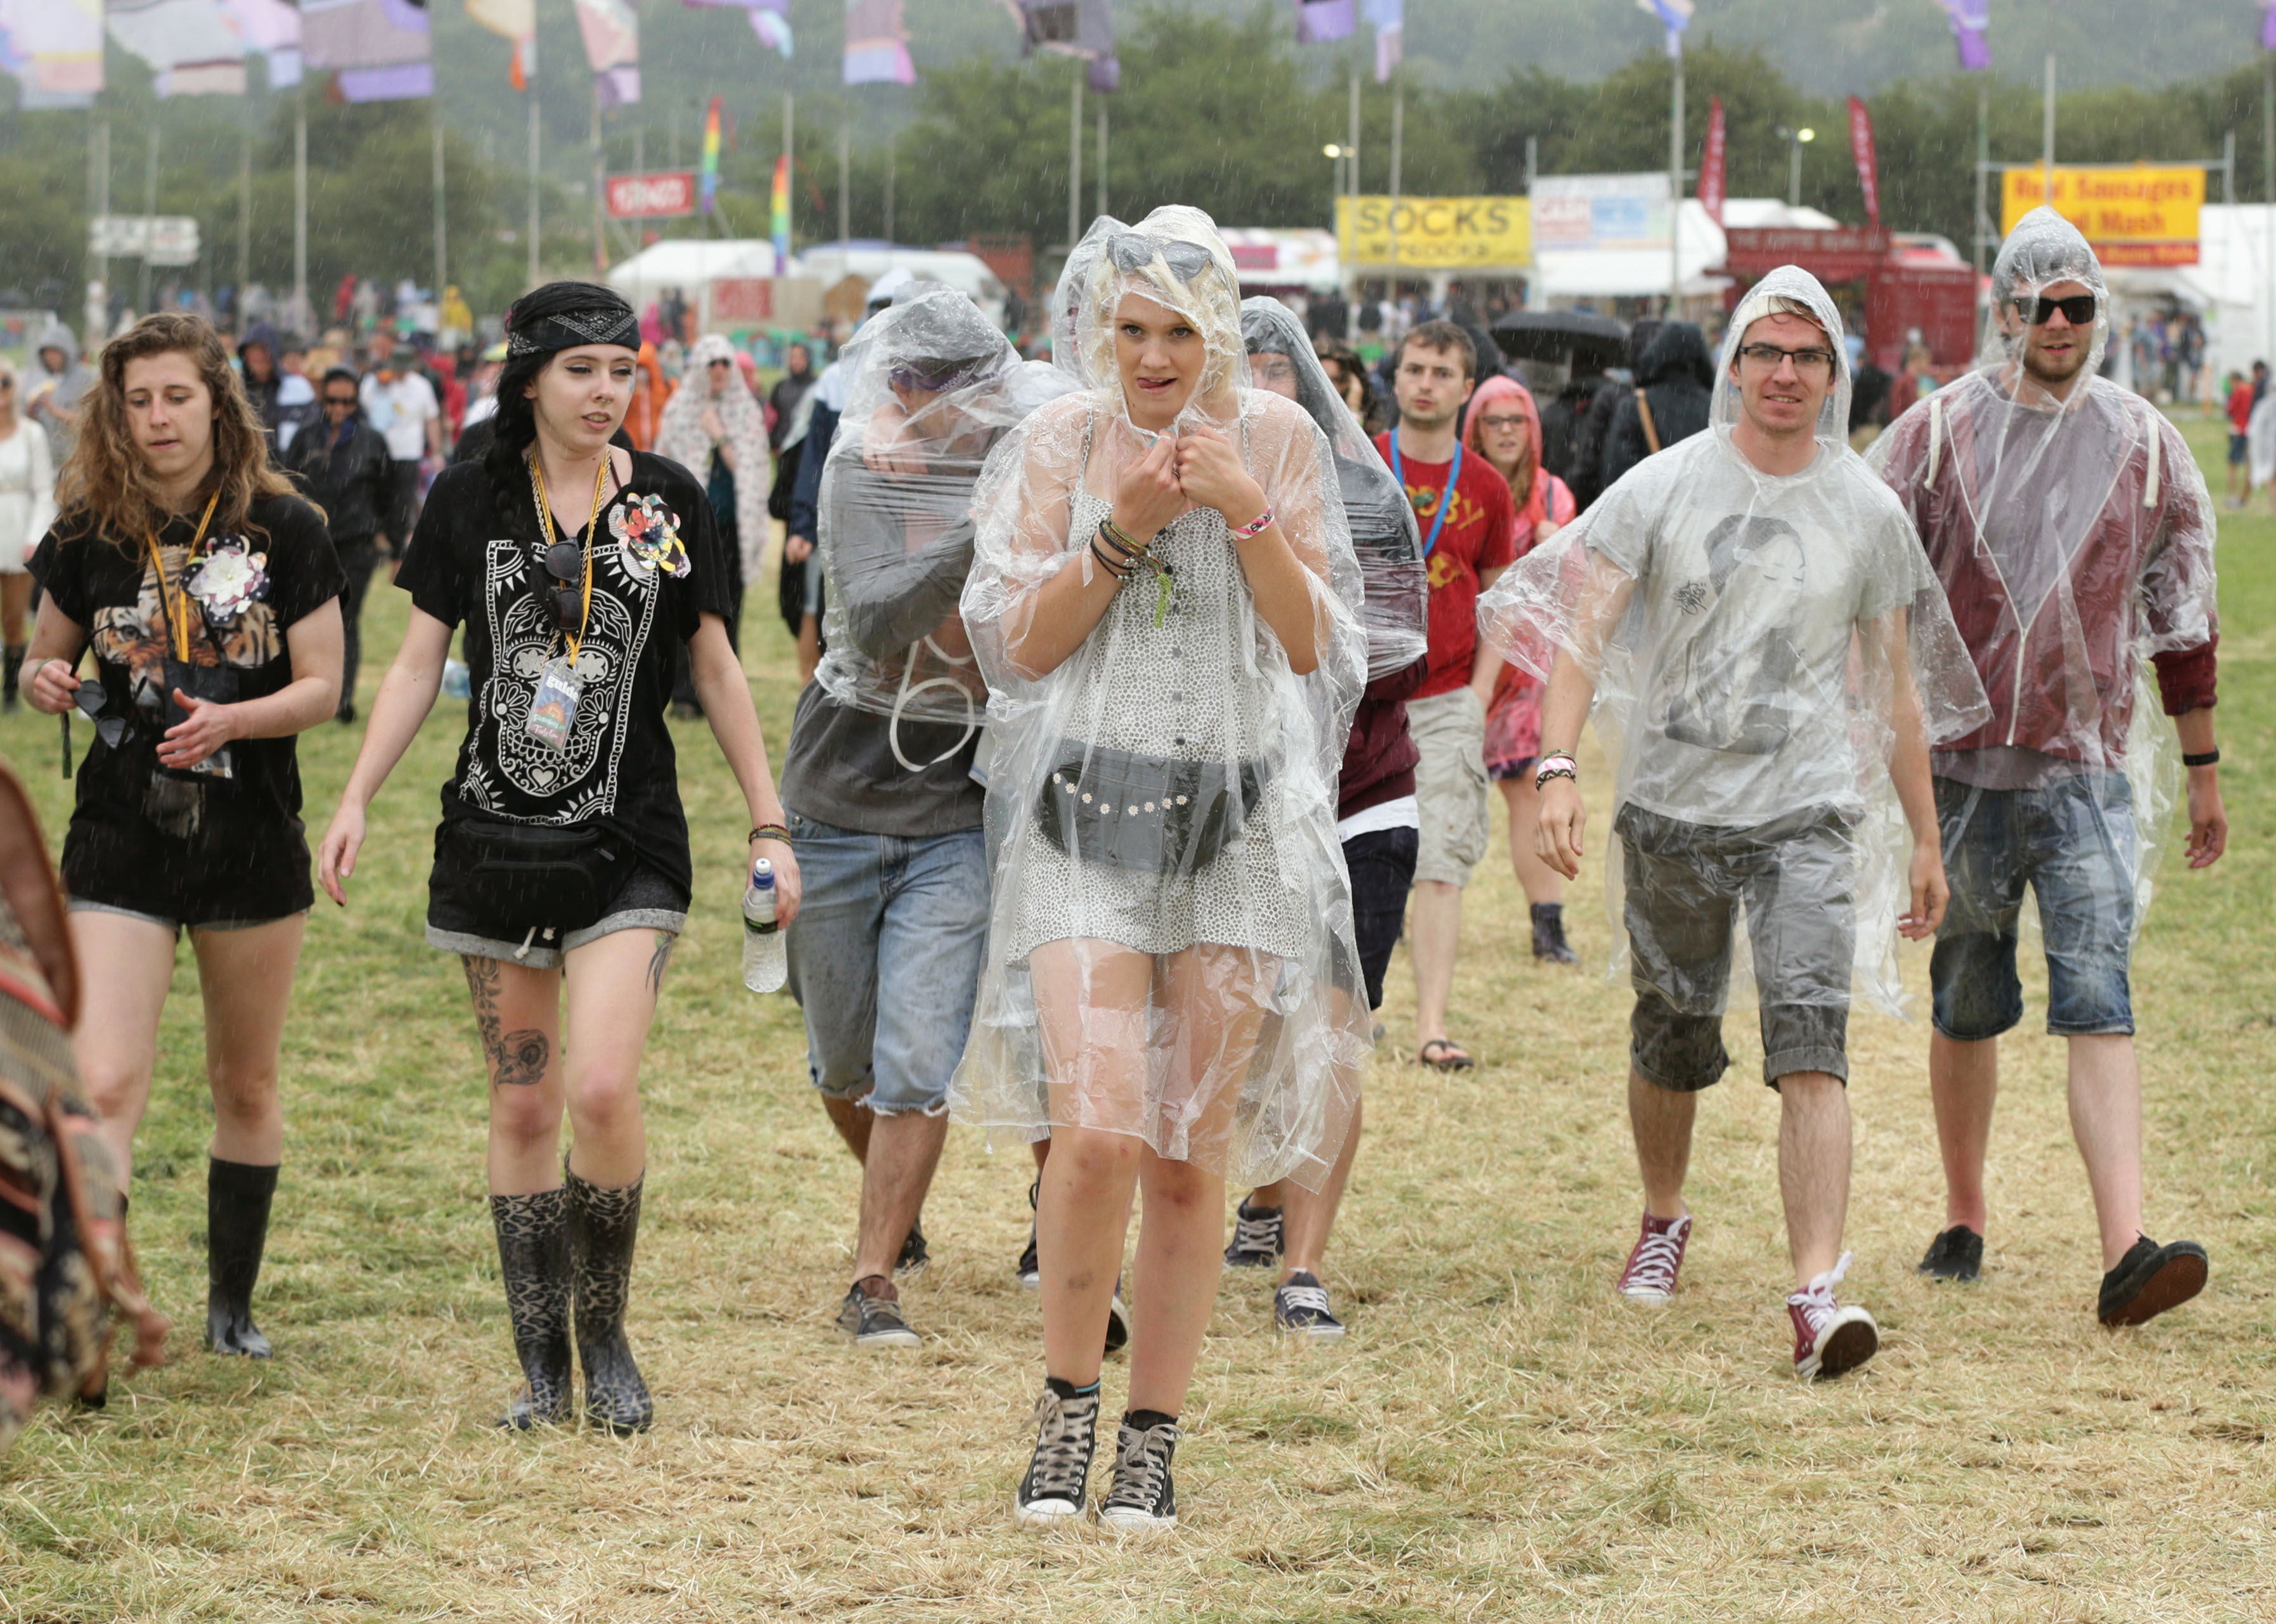 Festival goers during a rain shower at the Glastonbury Festival (PA)